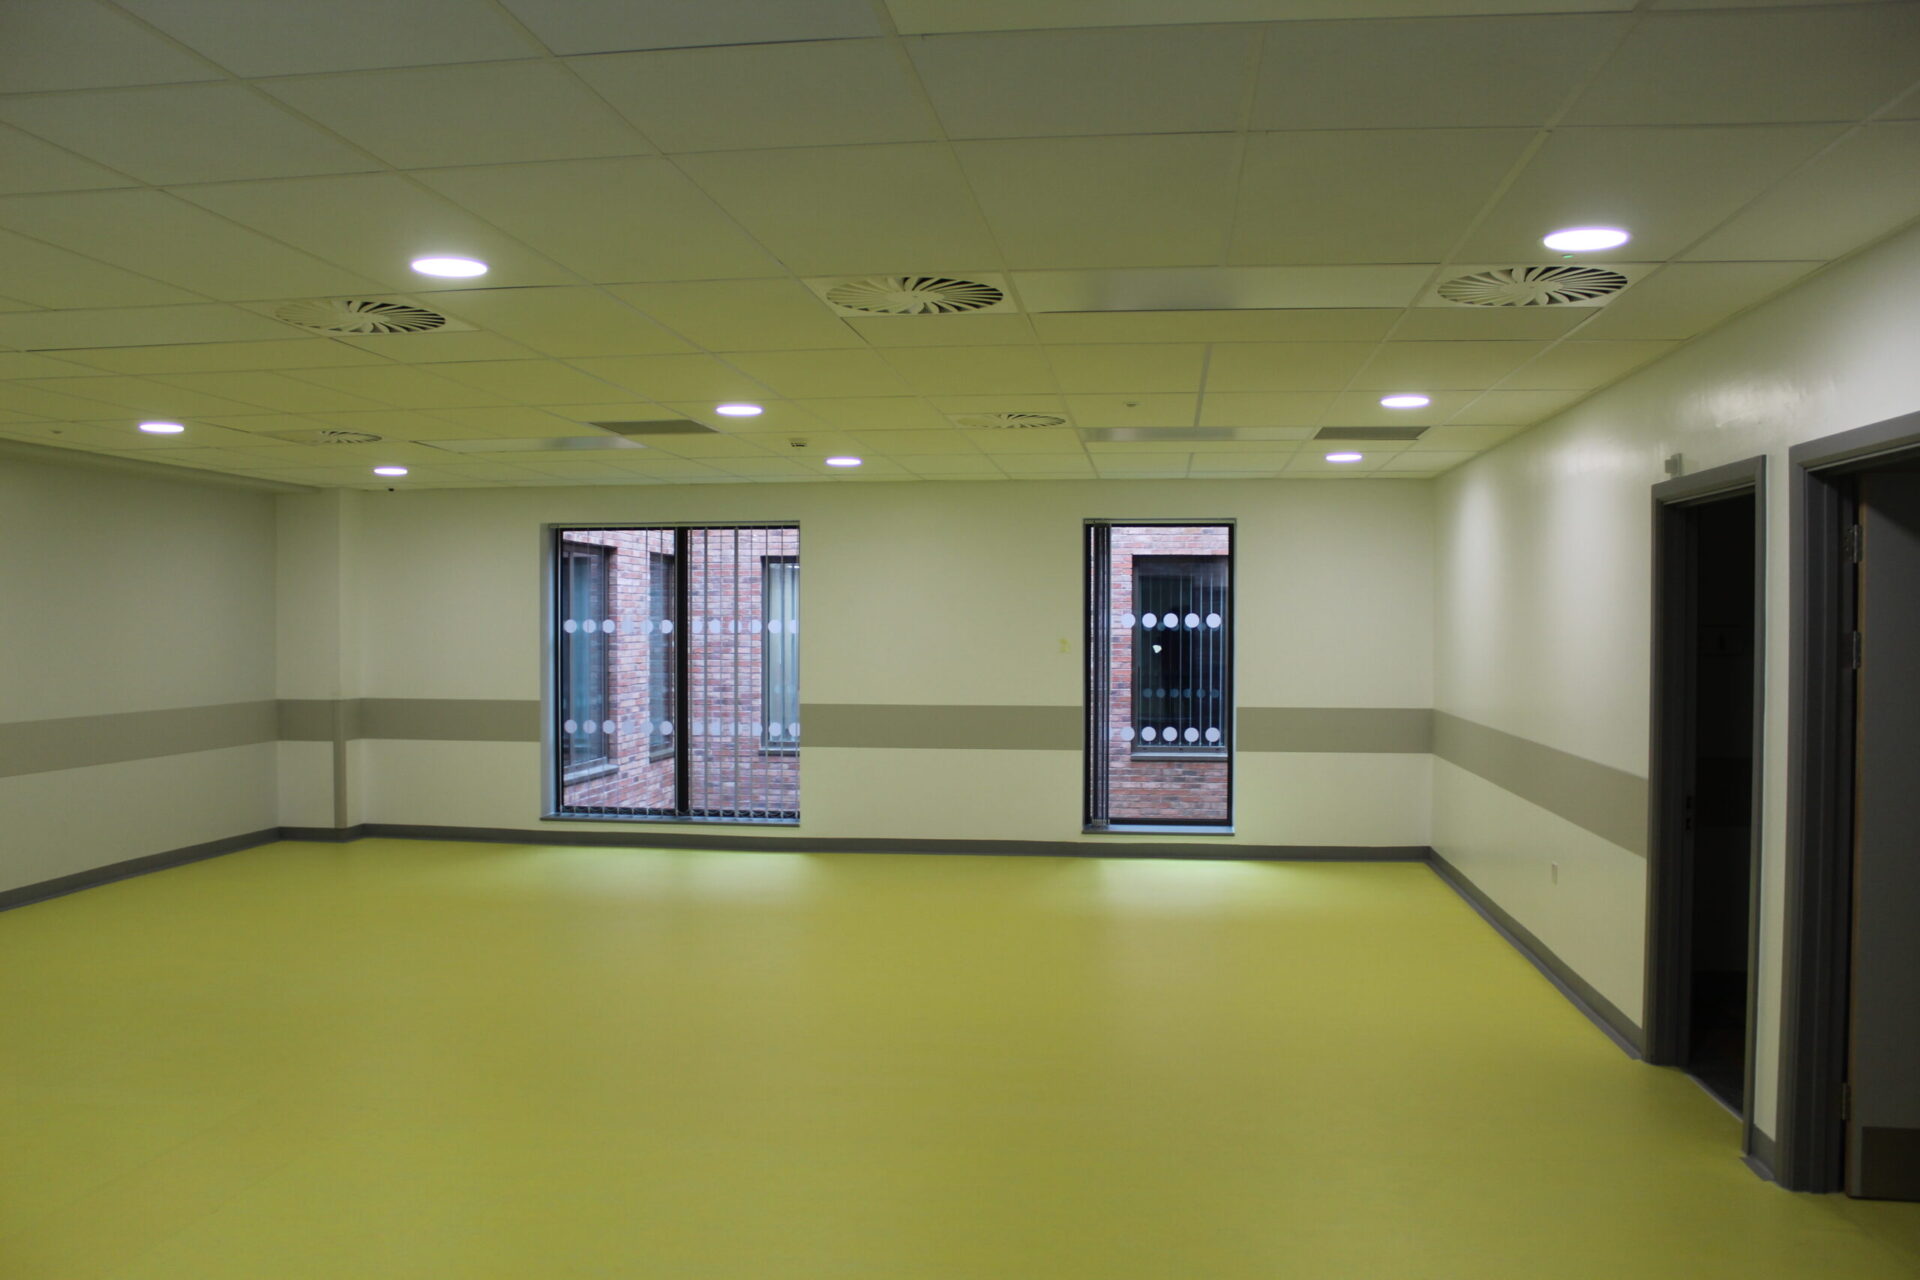 Paediatric services will be on the second floor